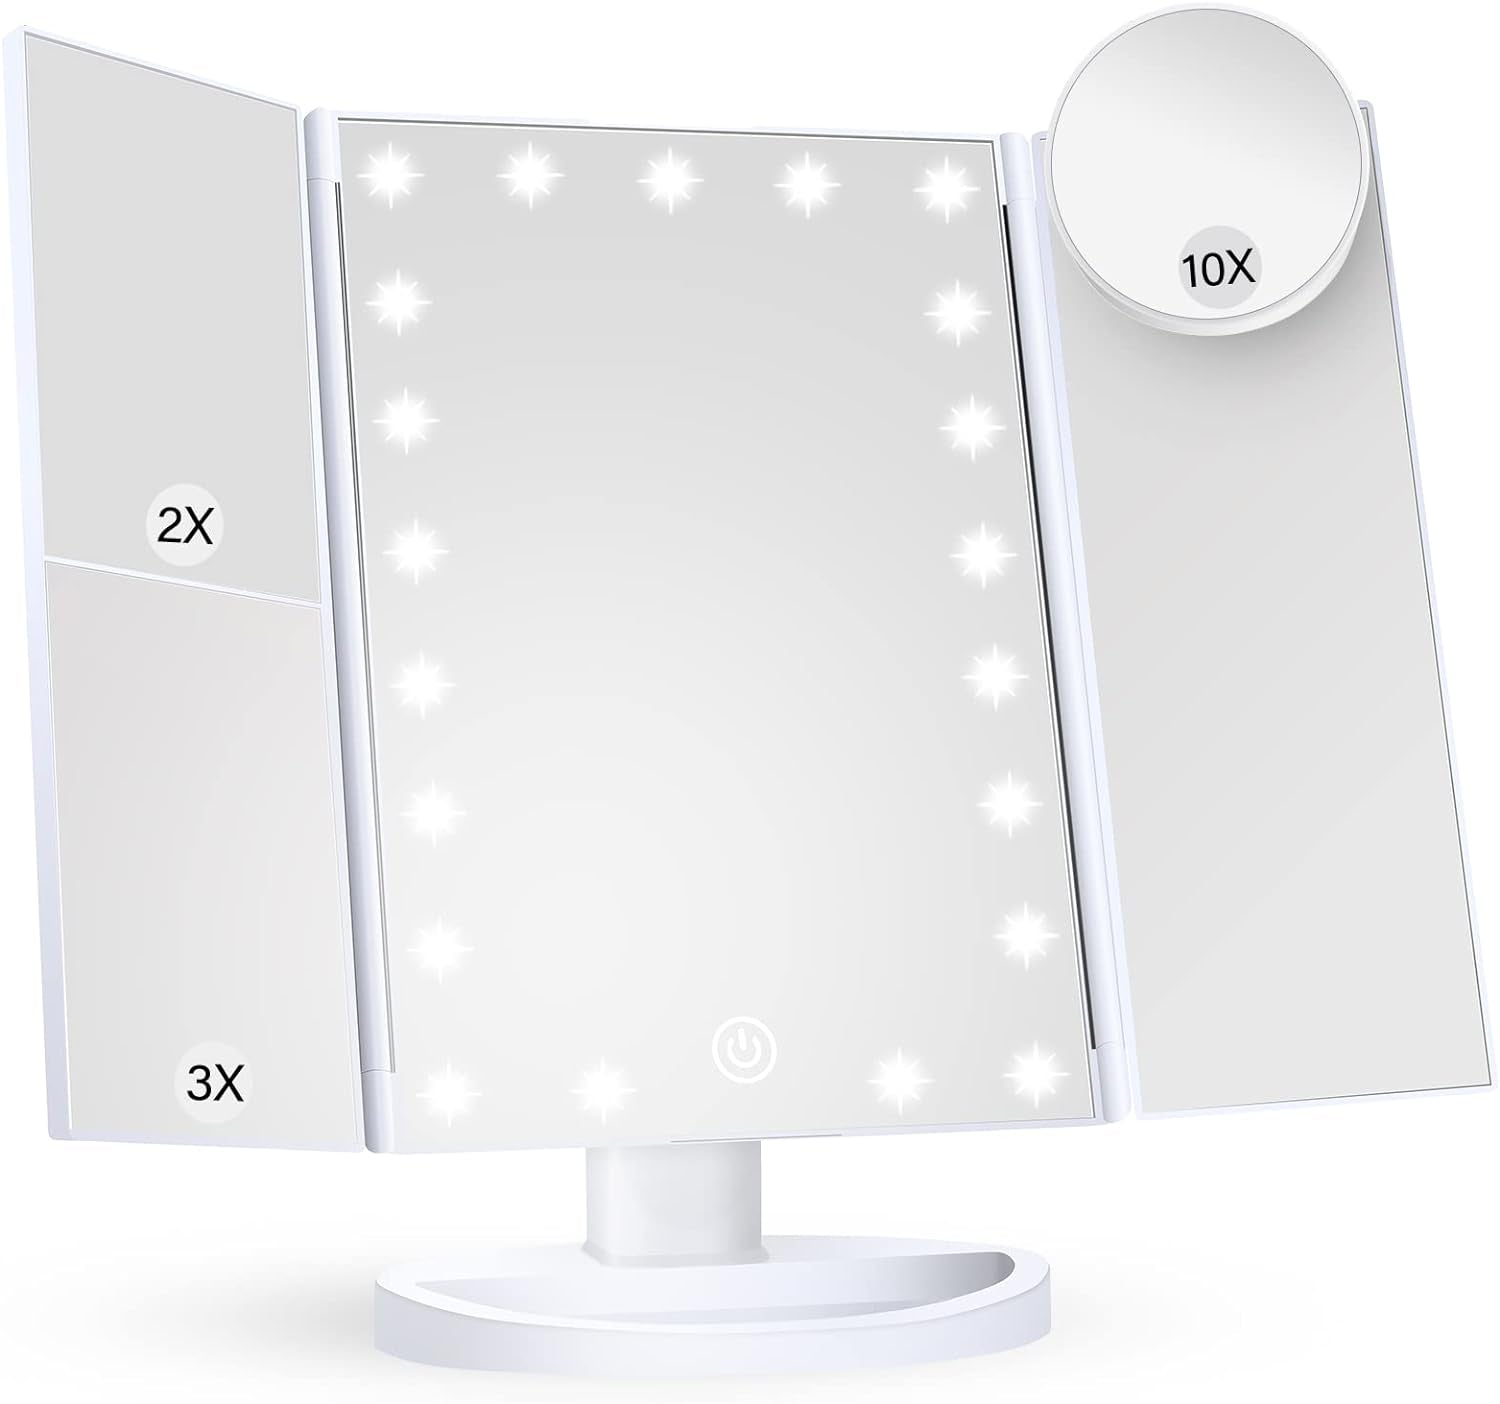 "Illuminate Your Beauty: Rose Gold Trifold Makeup Mirror with Lights, 10X 3X 2X Magnification, Touch Control, Dual Power Supply - Perfect Portable LED Vanity Mirror for Women"